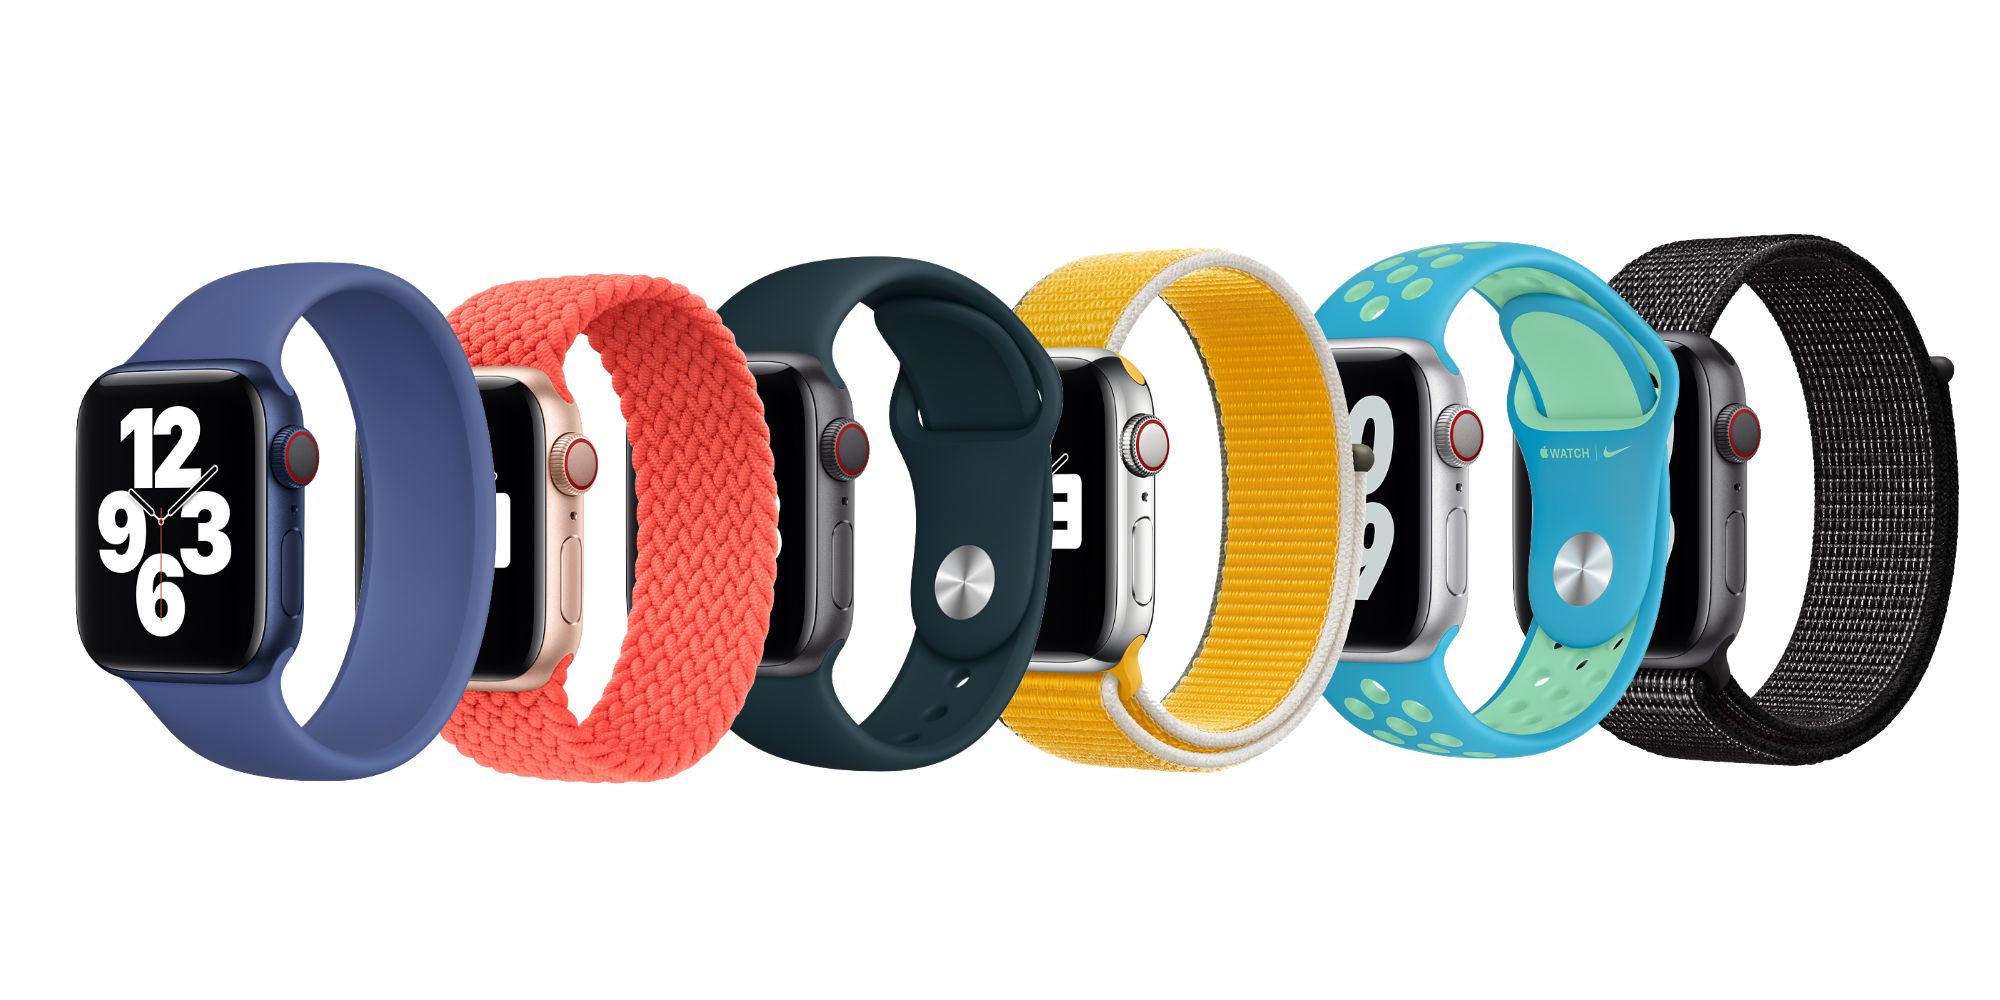 Sports bands for the Apple Watch